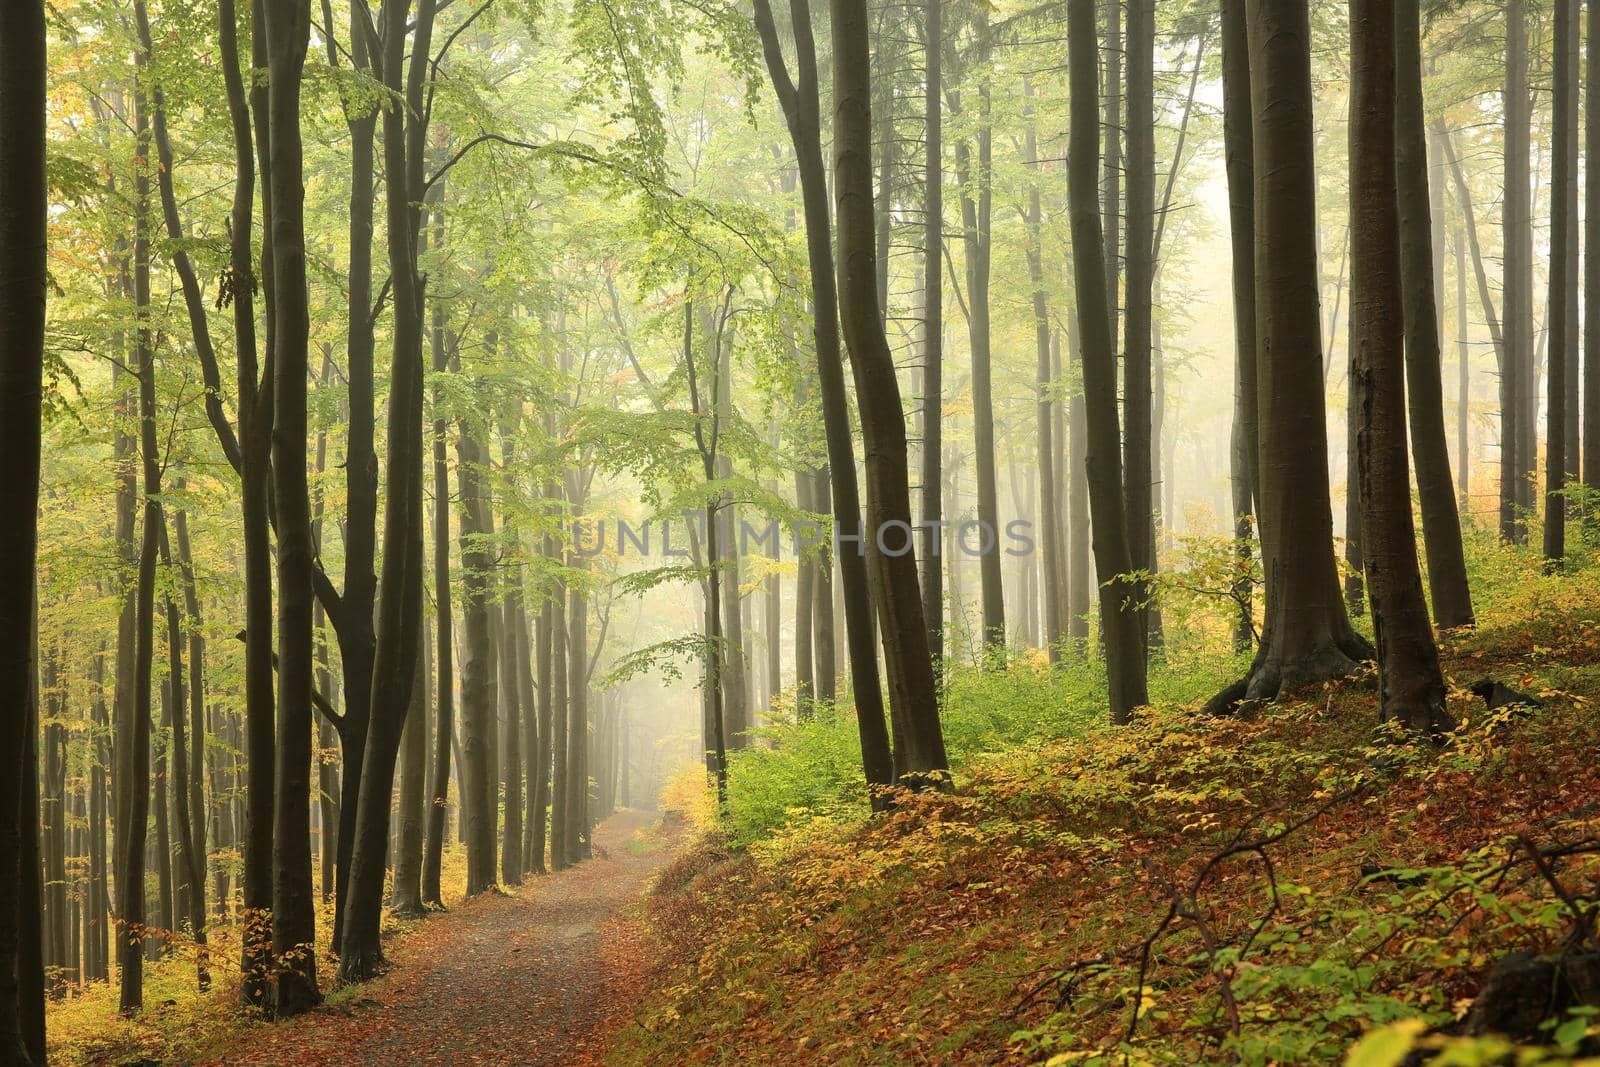 Trail among beech trees in an autumn forest in foggy weather.